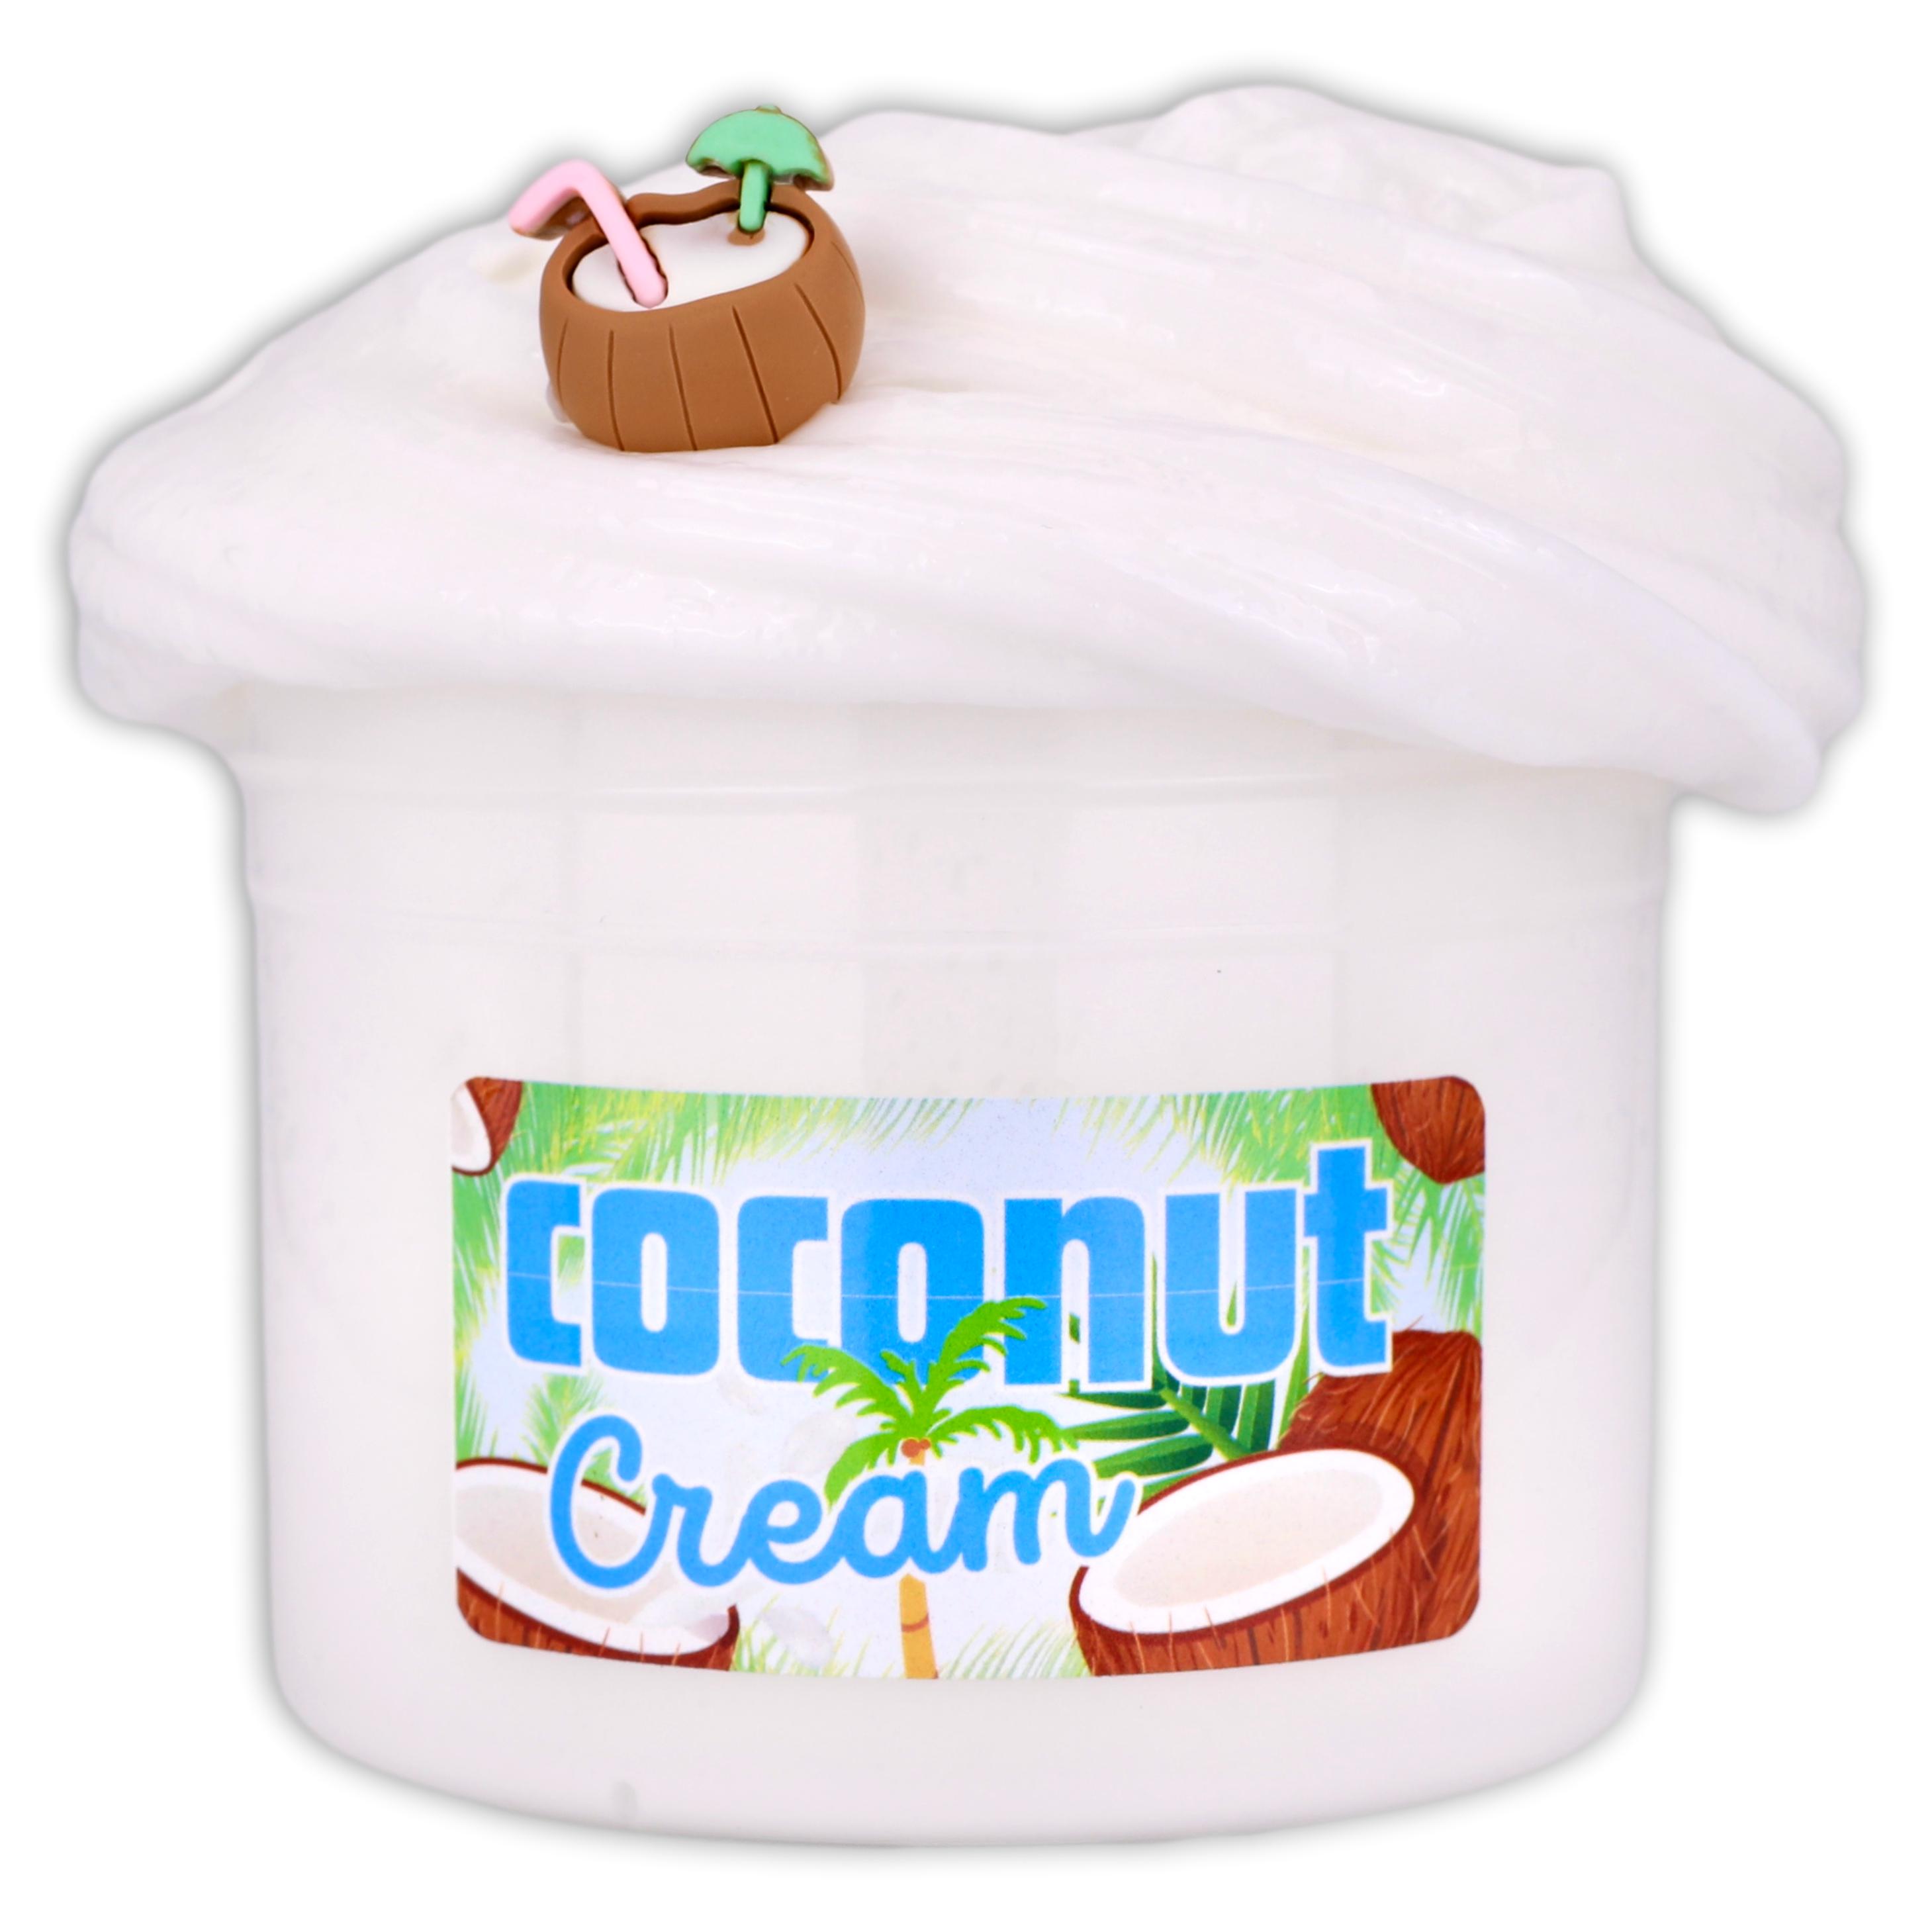 Coconut Cream Thick & Glossy Slime - Shop Slime - Dope Slimes